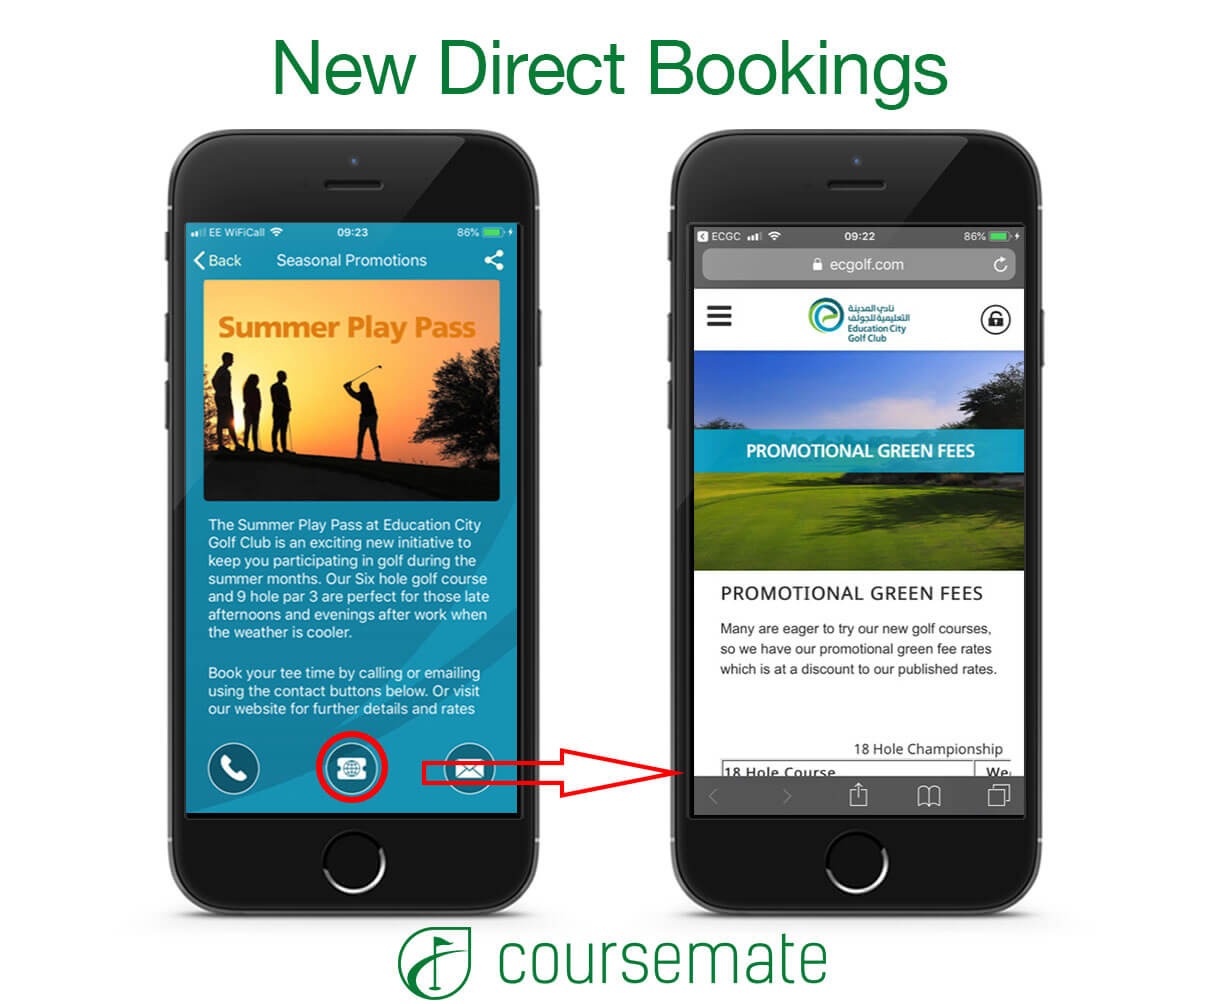 New direct bookings